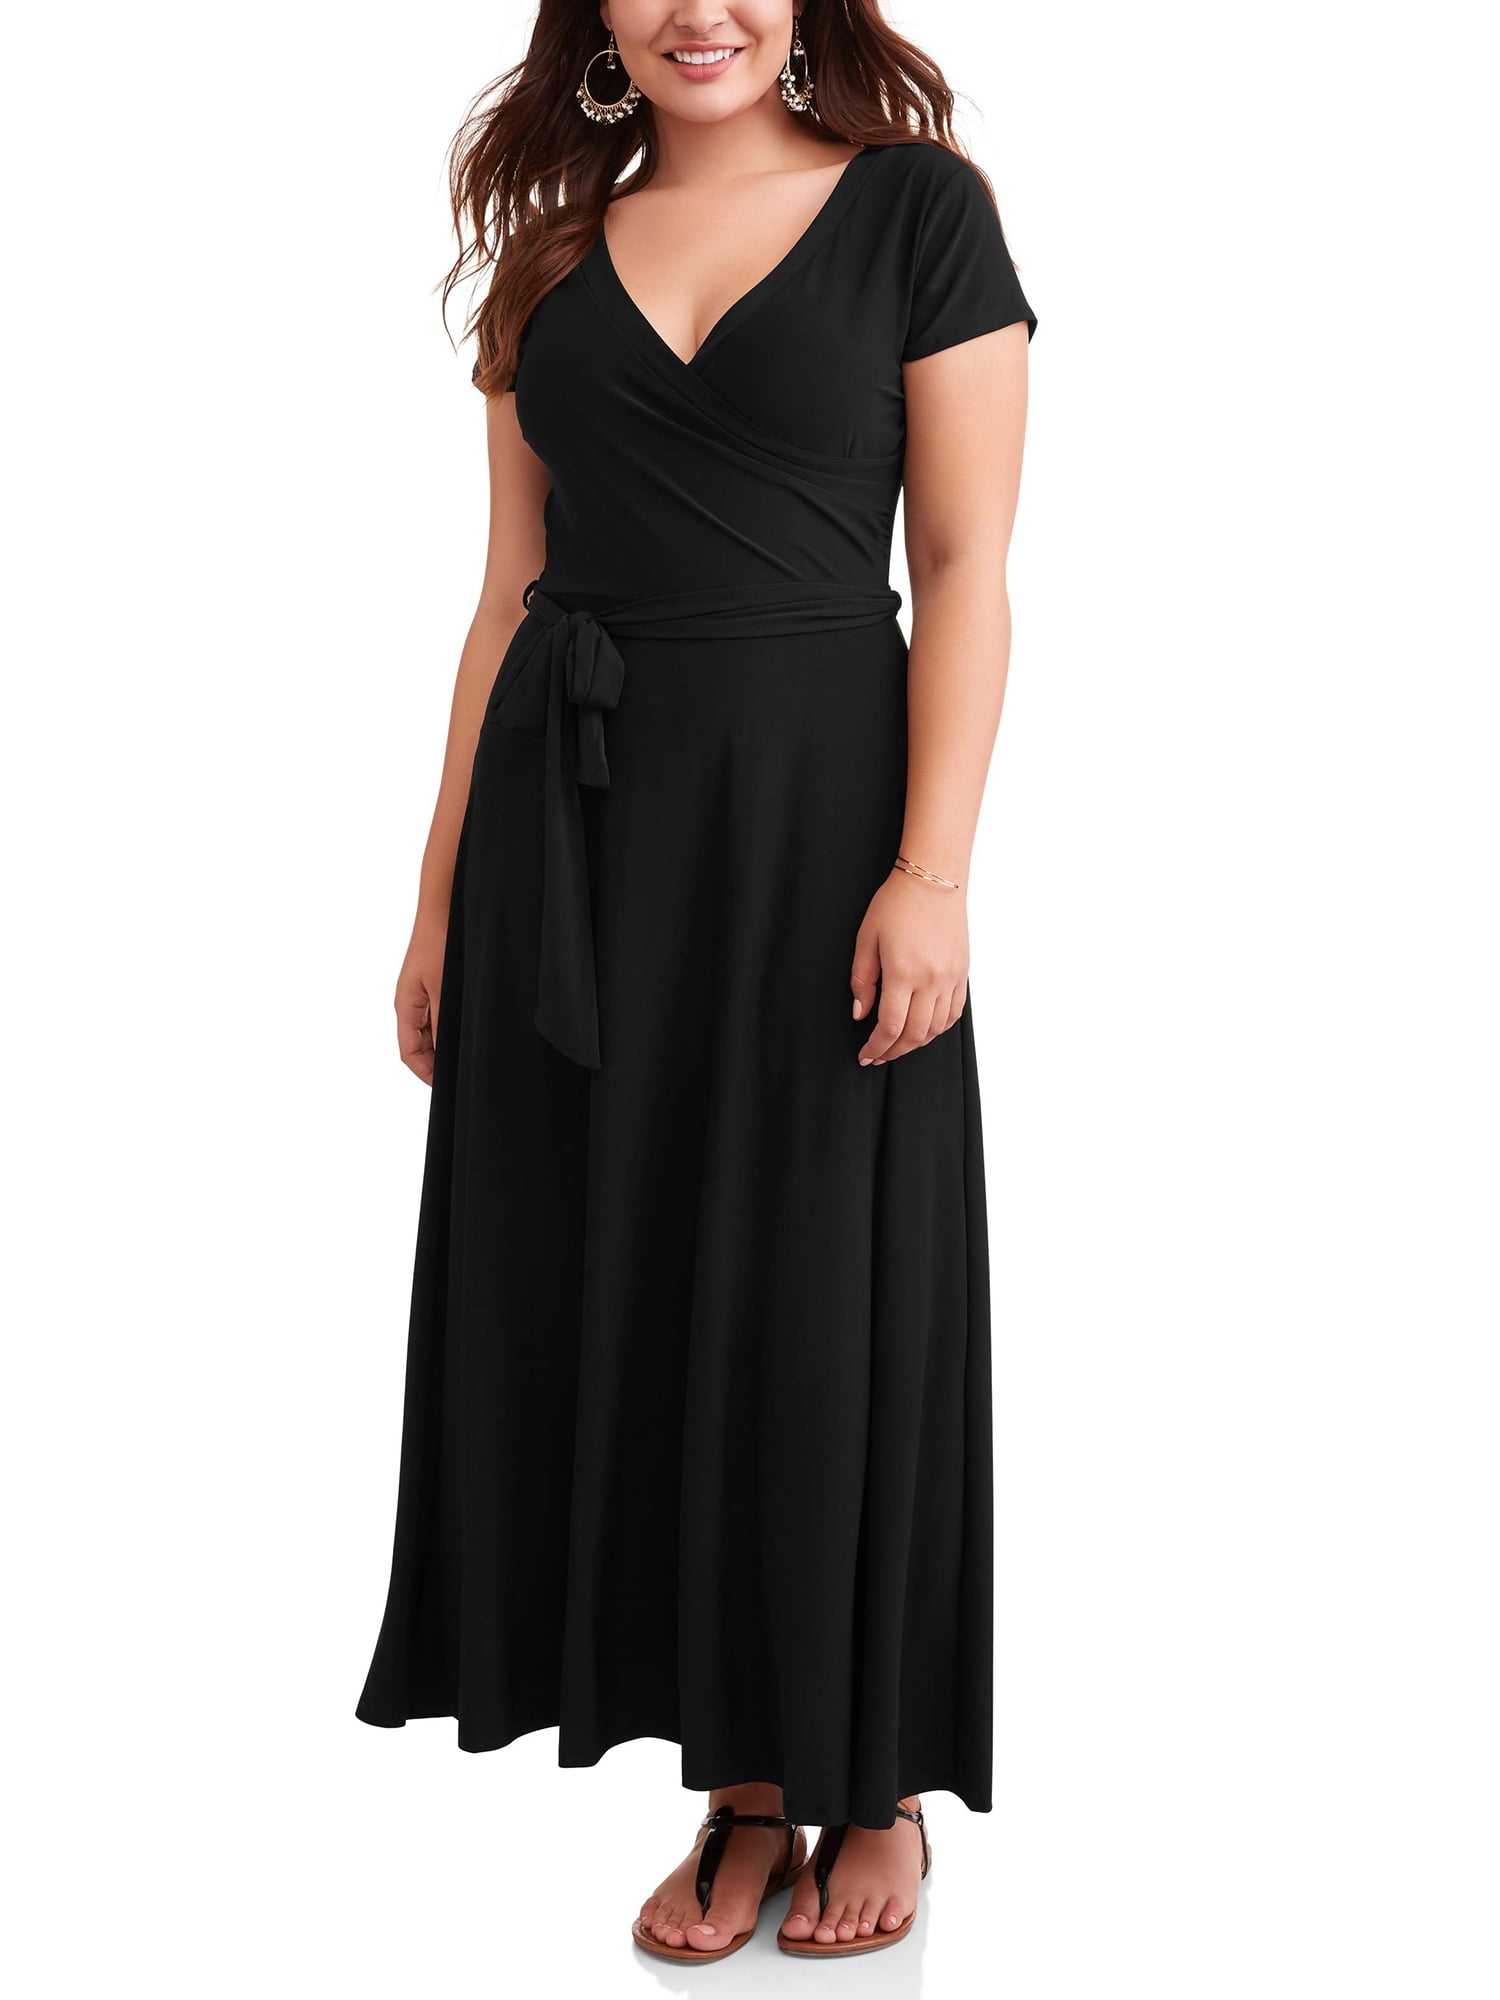 Women Long Sleeve Backless Party Cocktail Ladies Baggy Midi Dress Plus Size 8-26 